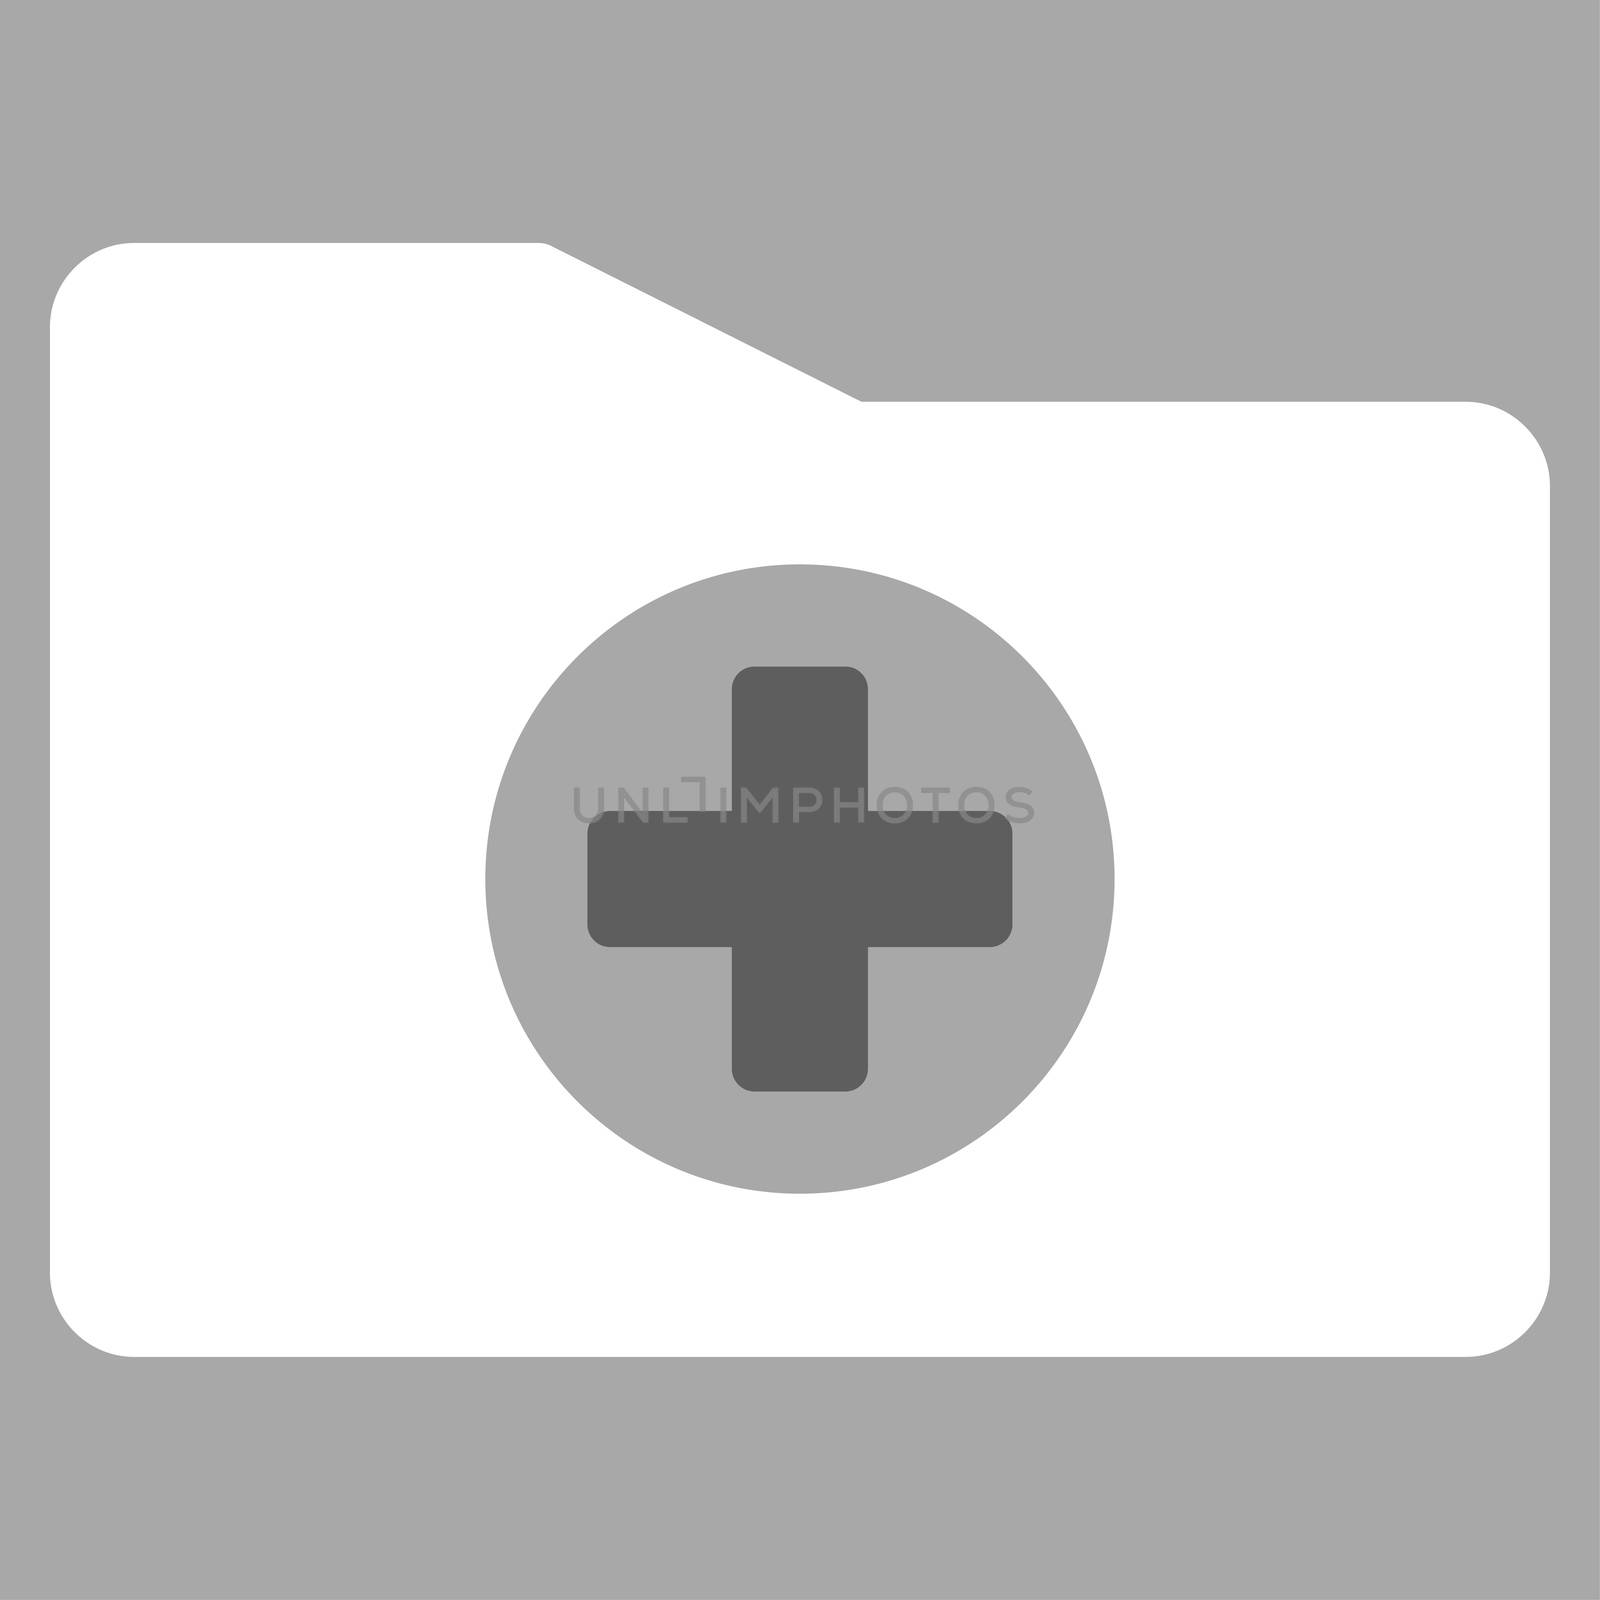 Medical Folder raster icon. Style is bicolor flat symbol, dark gray and white colors, rounded angles, silver background.